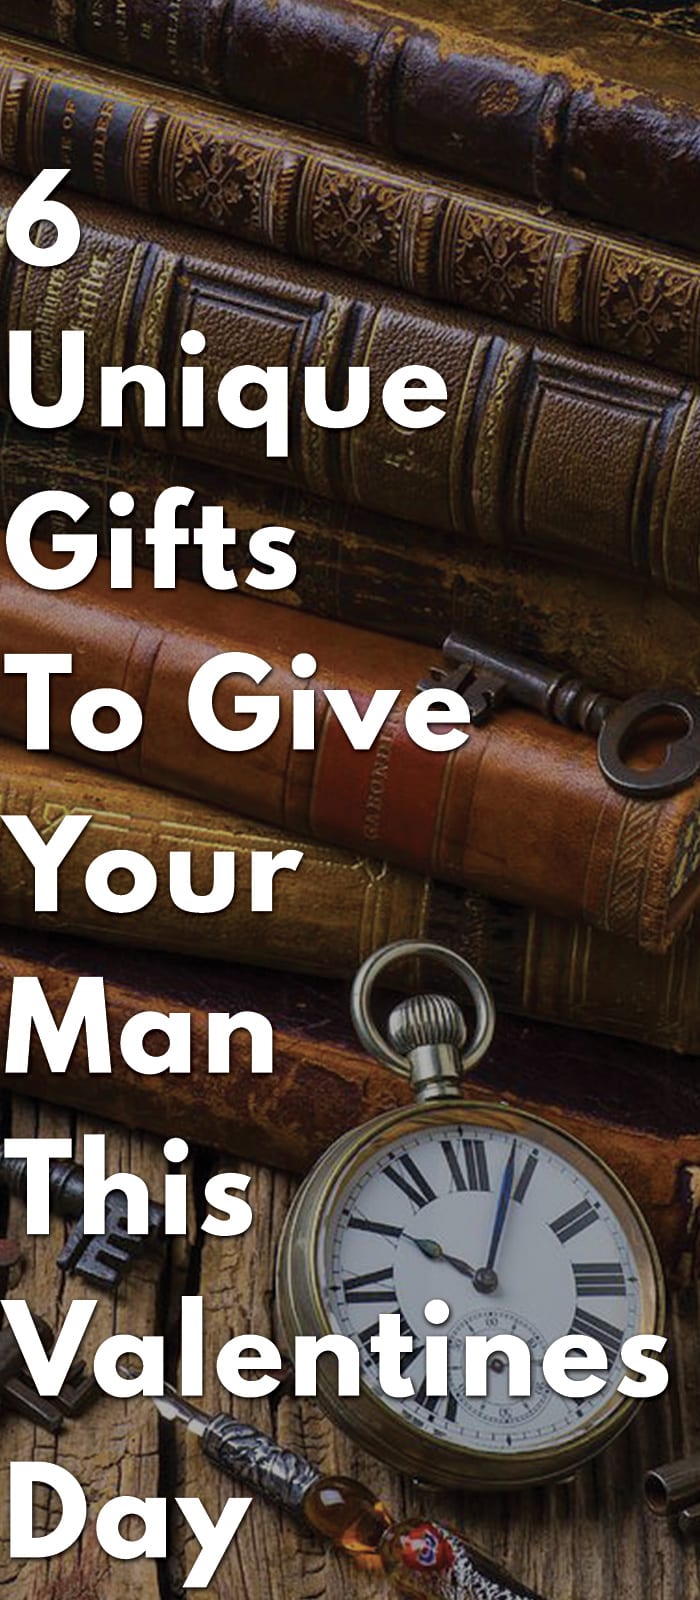 6-Unique-Gifts-To-Give-Your-Man-This-Valentine’s-Day